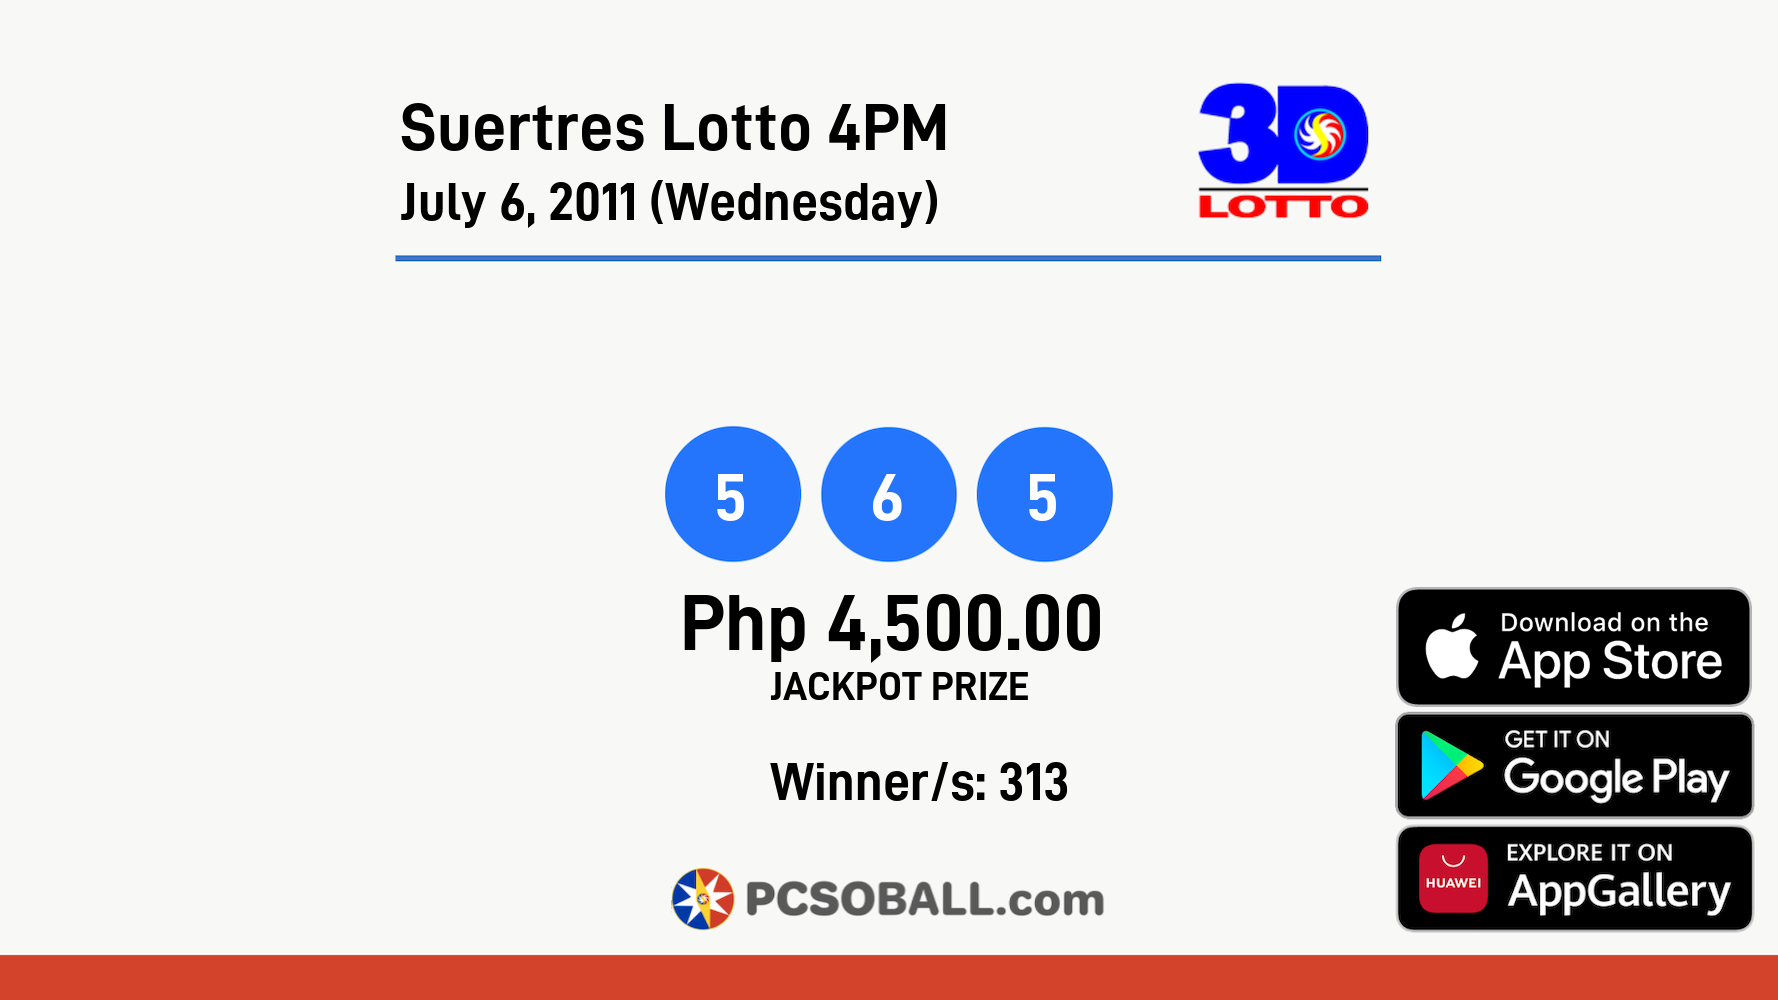 Suertres Lotto 4PM July 6, 2011 (Wednesday) Result